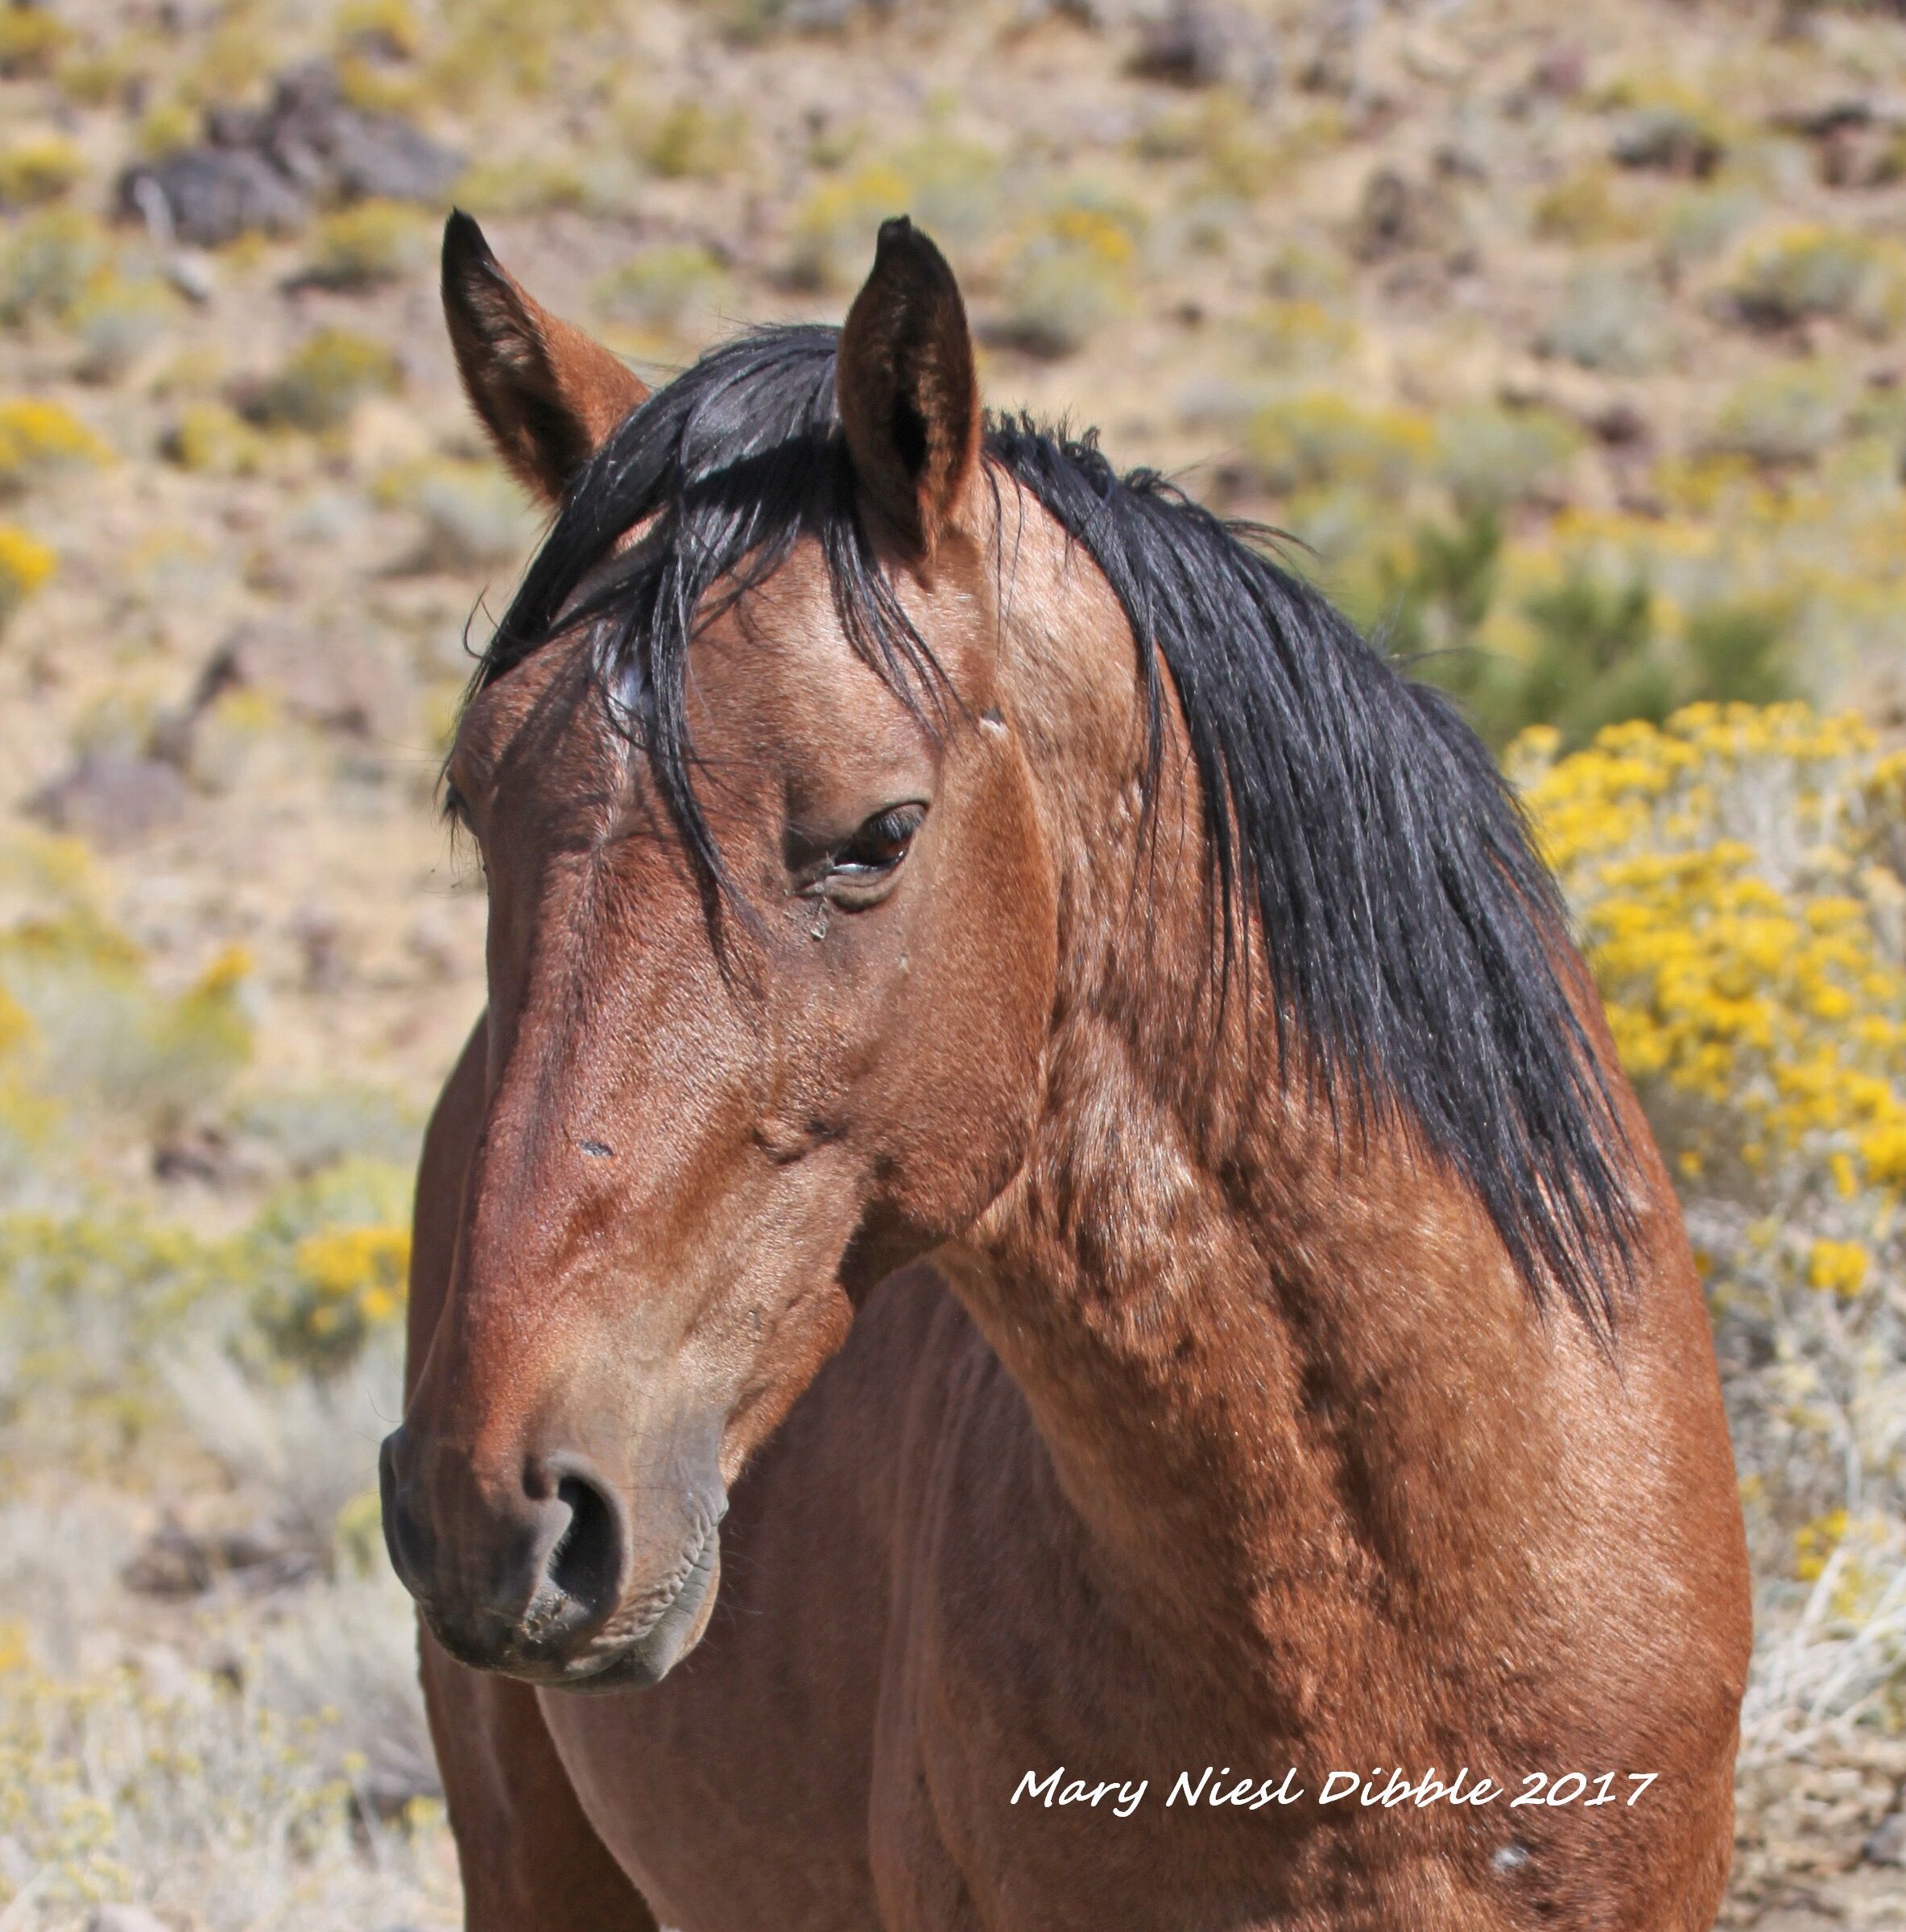 Pin by Mary Dibble on Wild horses | Pinterest | Horse